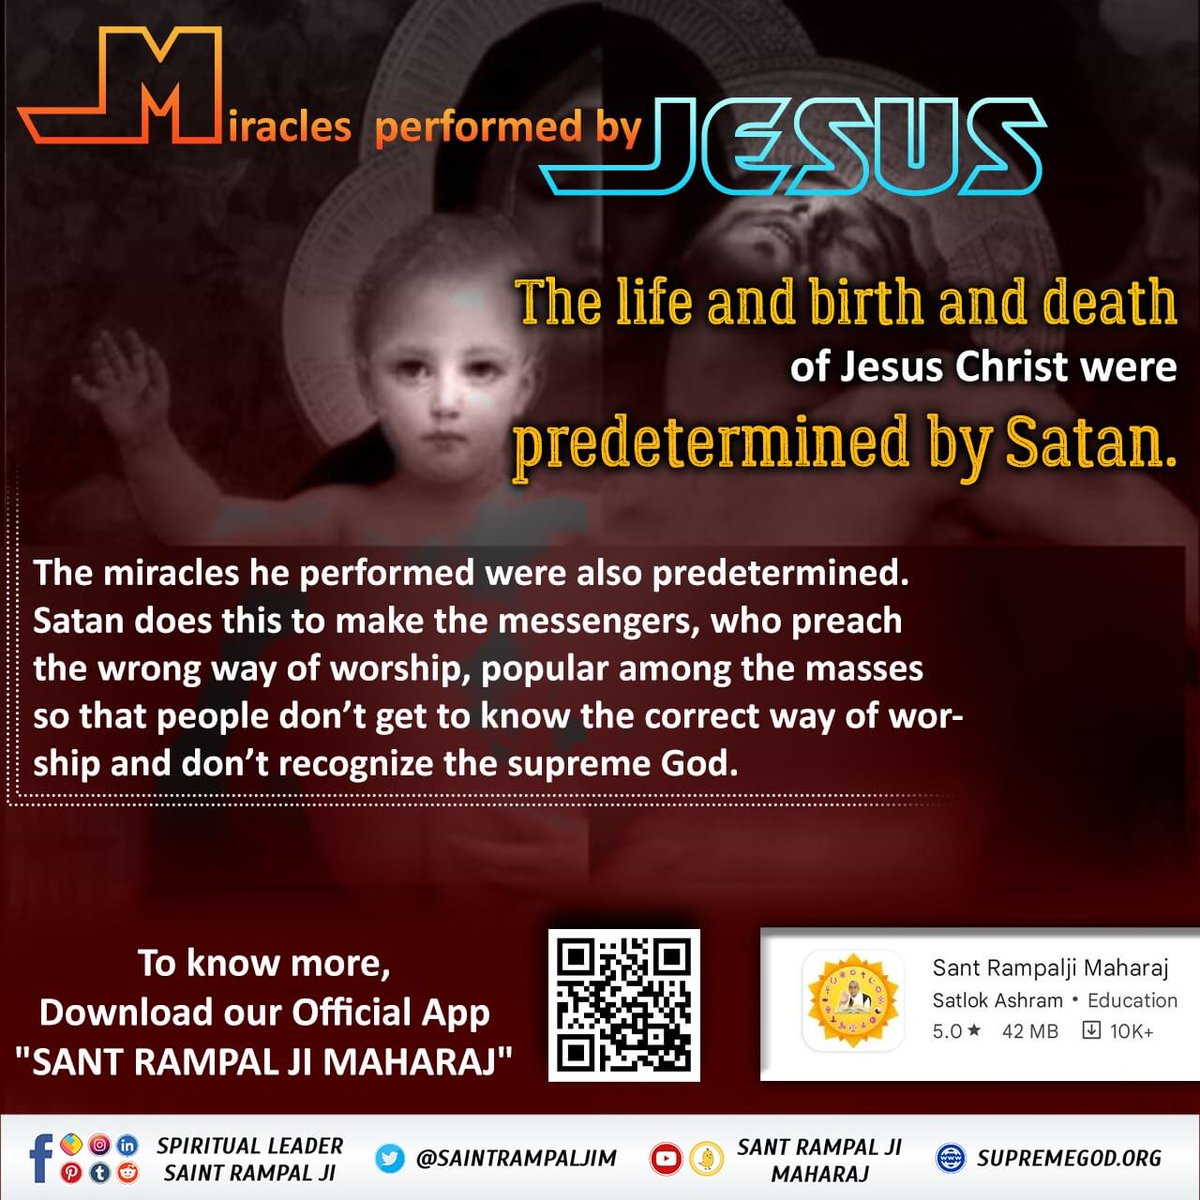 #Reality_of_Christianity
Facts About Jesus Christ was born from a god.
Proof: Holy Bible, Gospel of Matthew written by Matthew = 1:25, page no. 1-2.
The name of the revered mother of Jesus was Mary and the name of the revered father was Joseph. But Mary was conceived from a god.